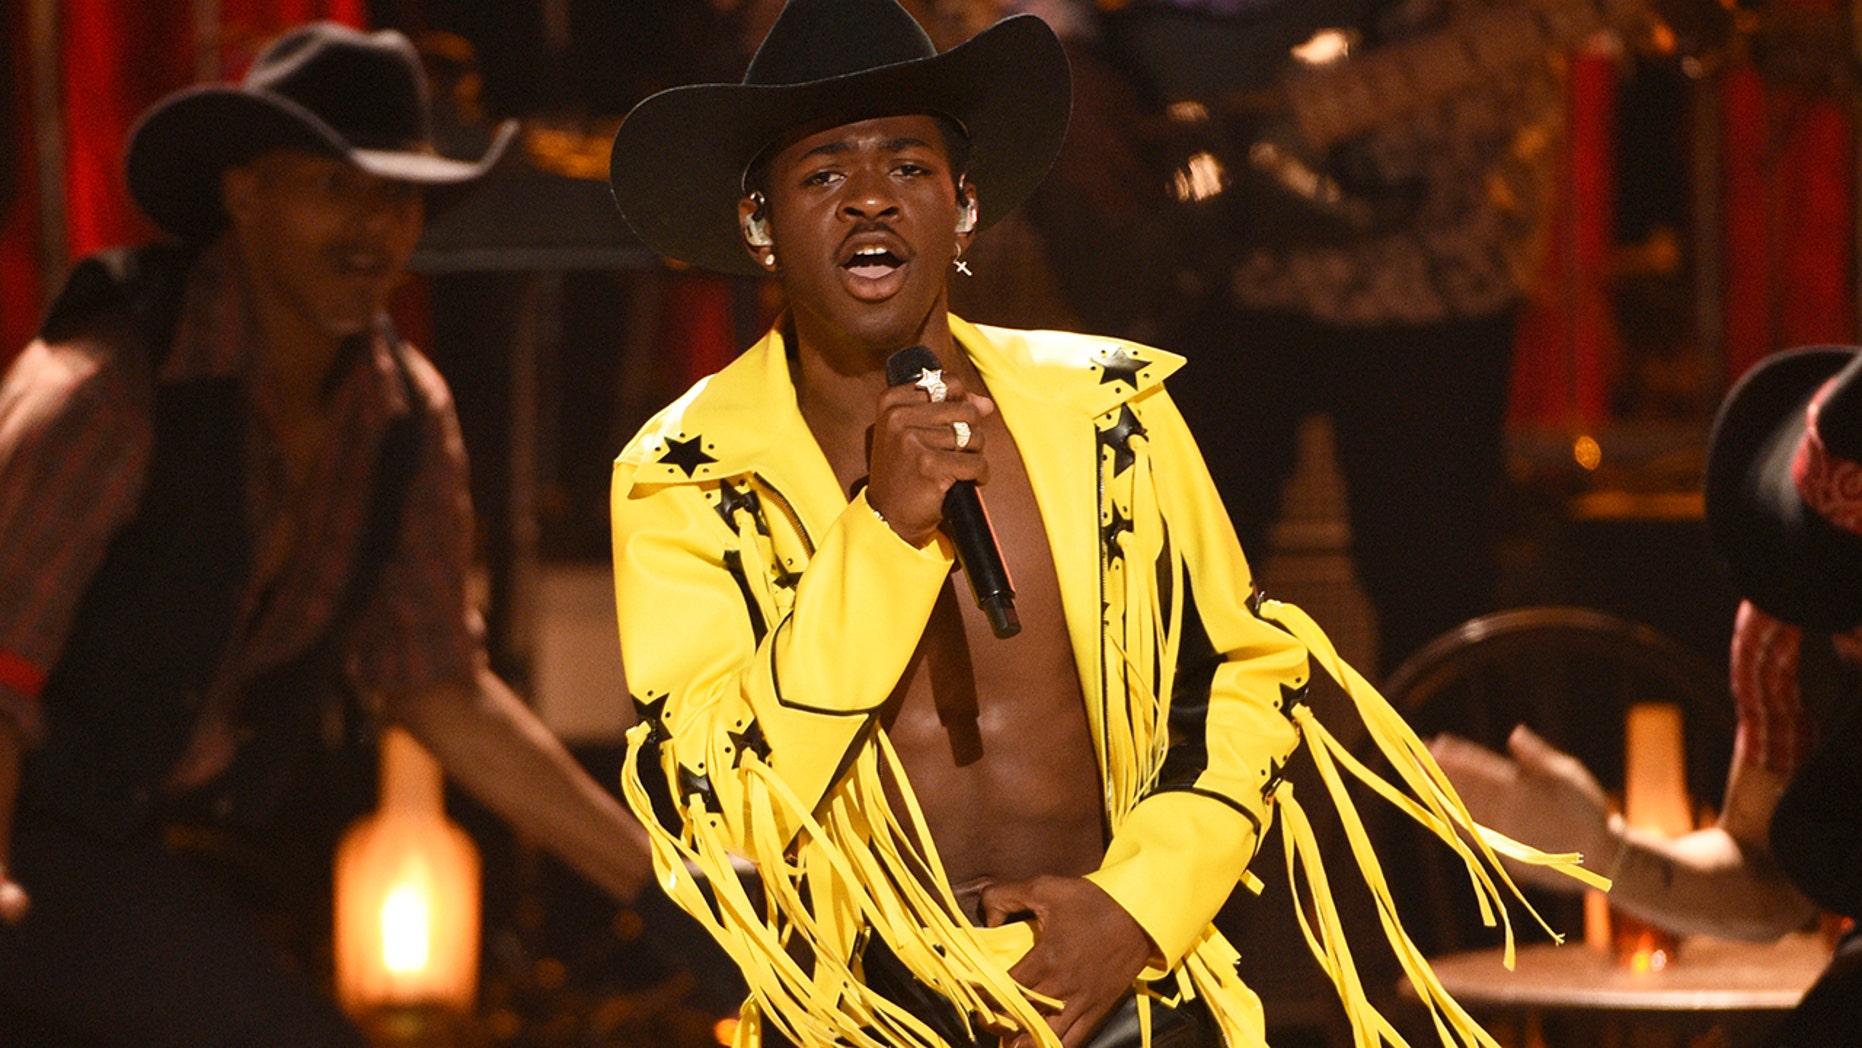 Old Town Road Rapper Lil Nas X Appears To Come Out During Pride Month Fox News Lamung Jakot 4943